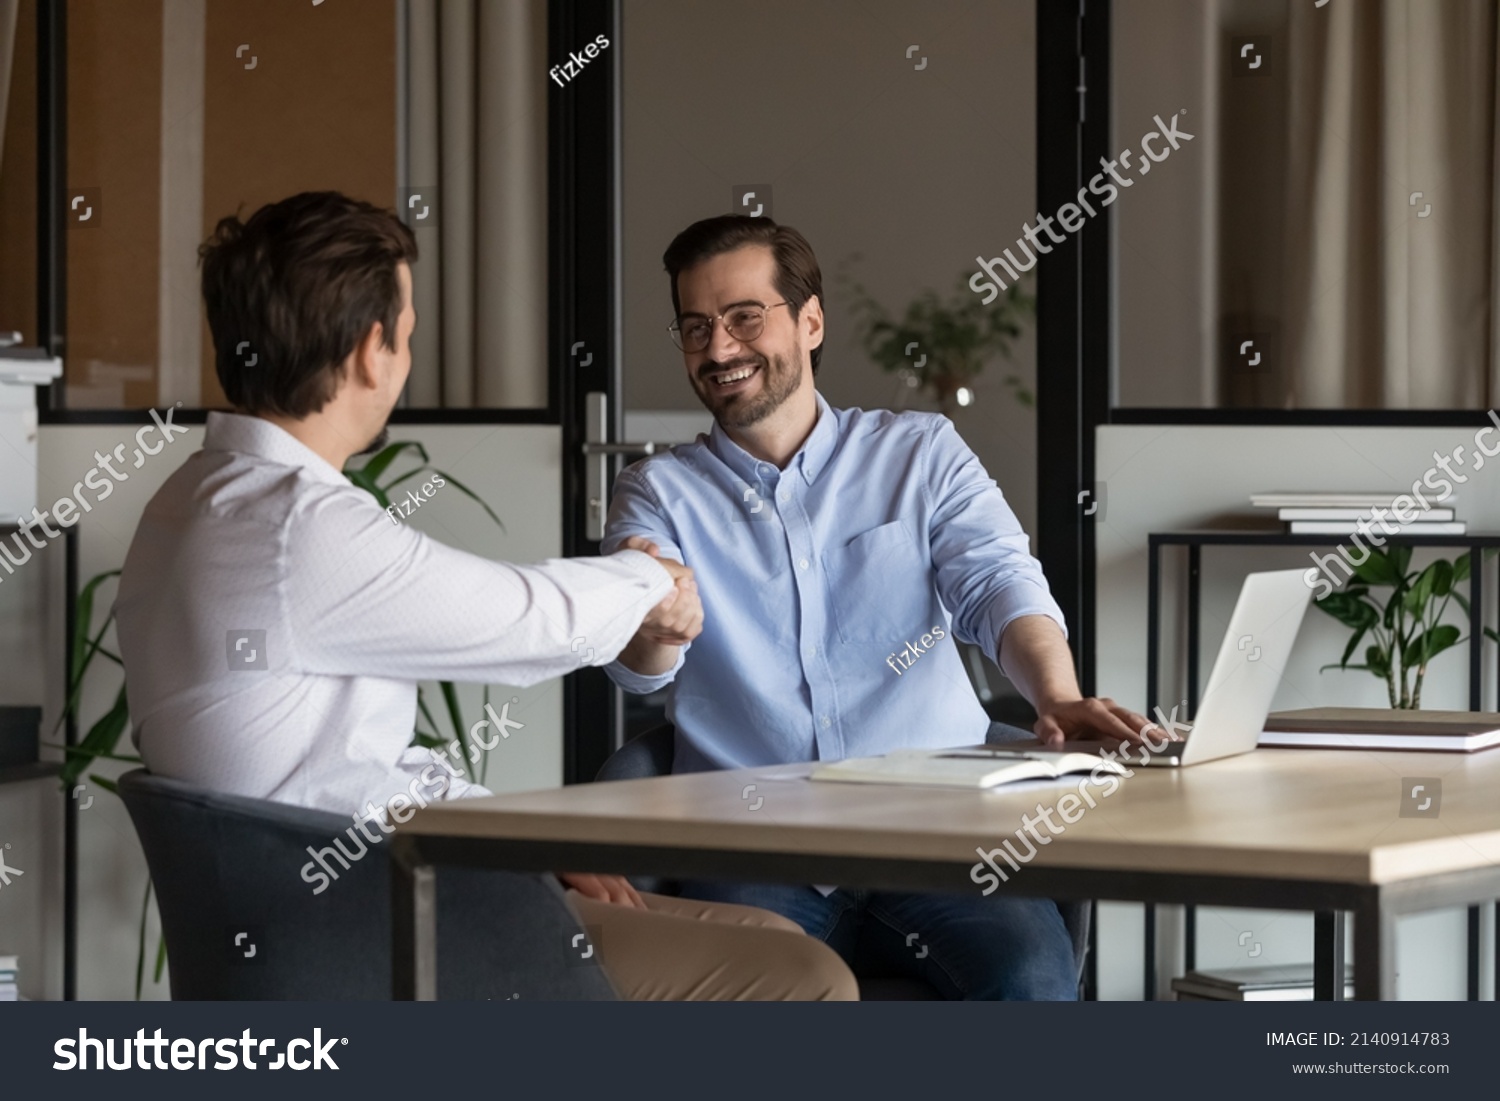 Employer, boss hiring candidate after successful job interview. Happy customer and lawyer, finishing consultation, meeting, shaking hands. Happy business men giving handshakes after negotiations #2140914783